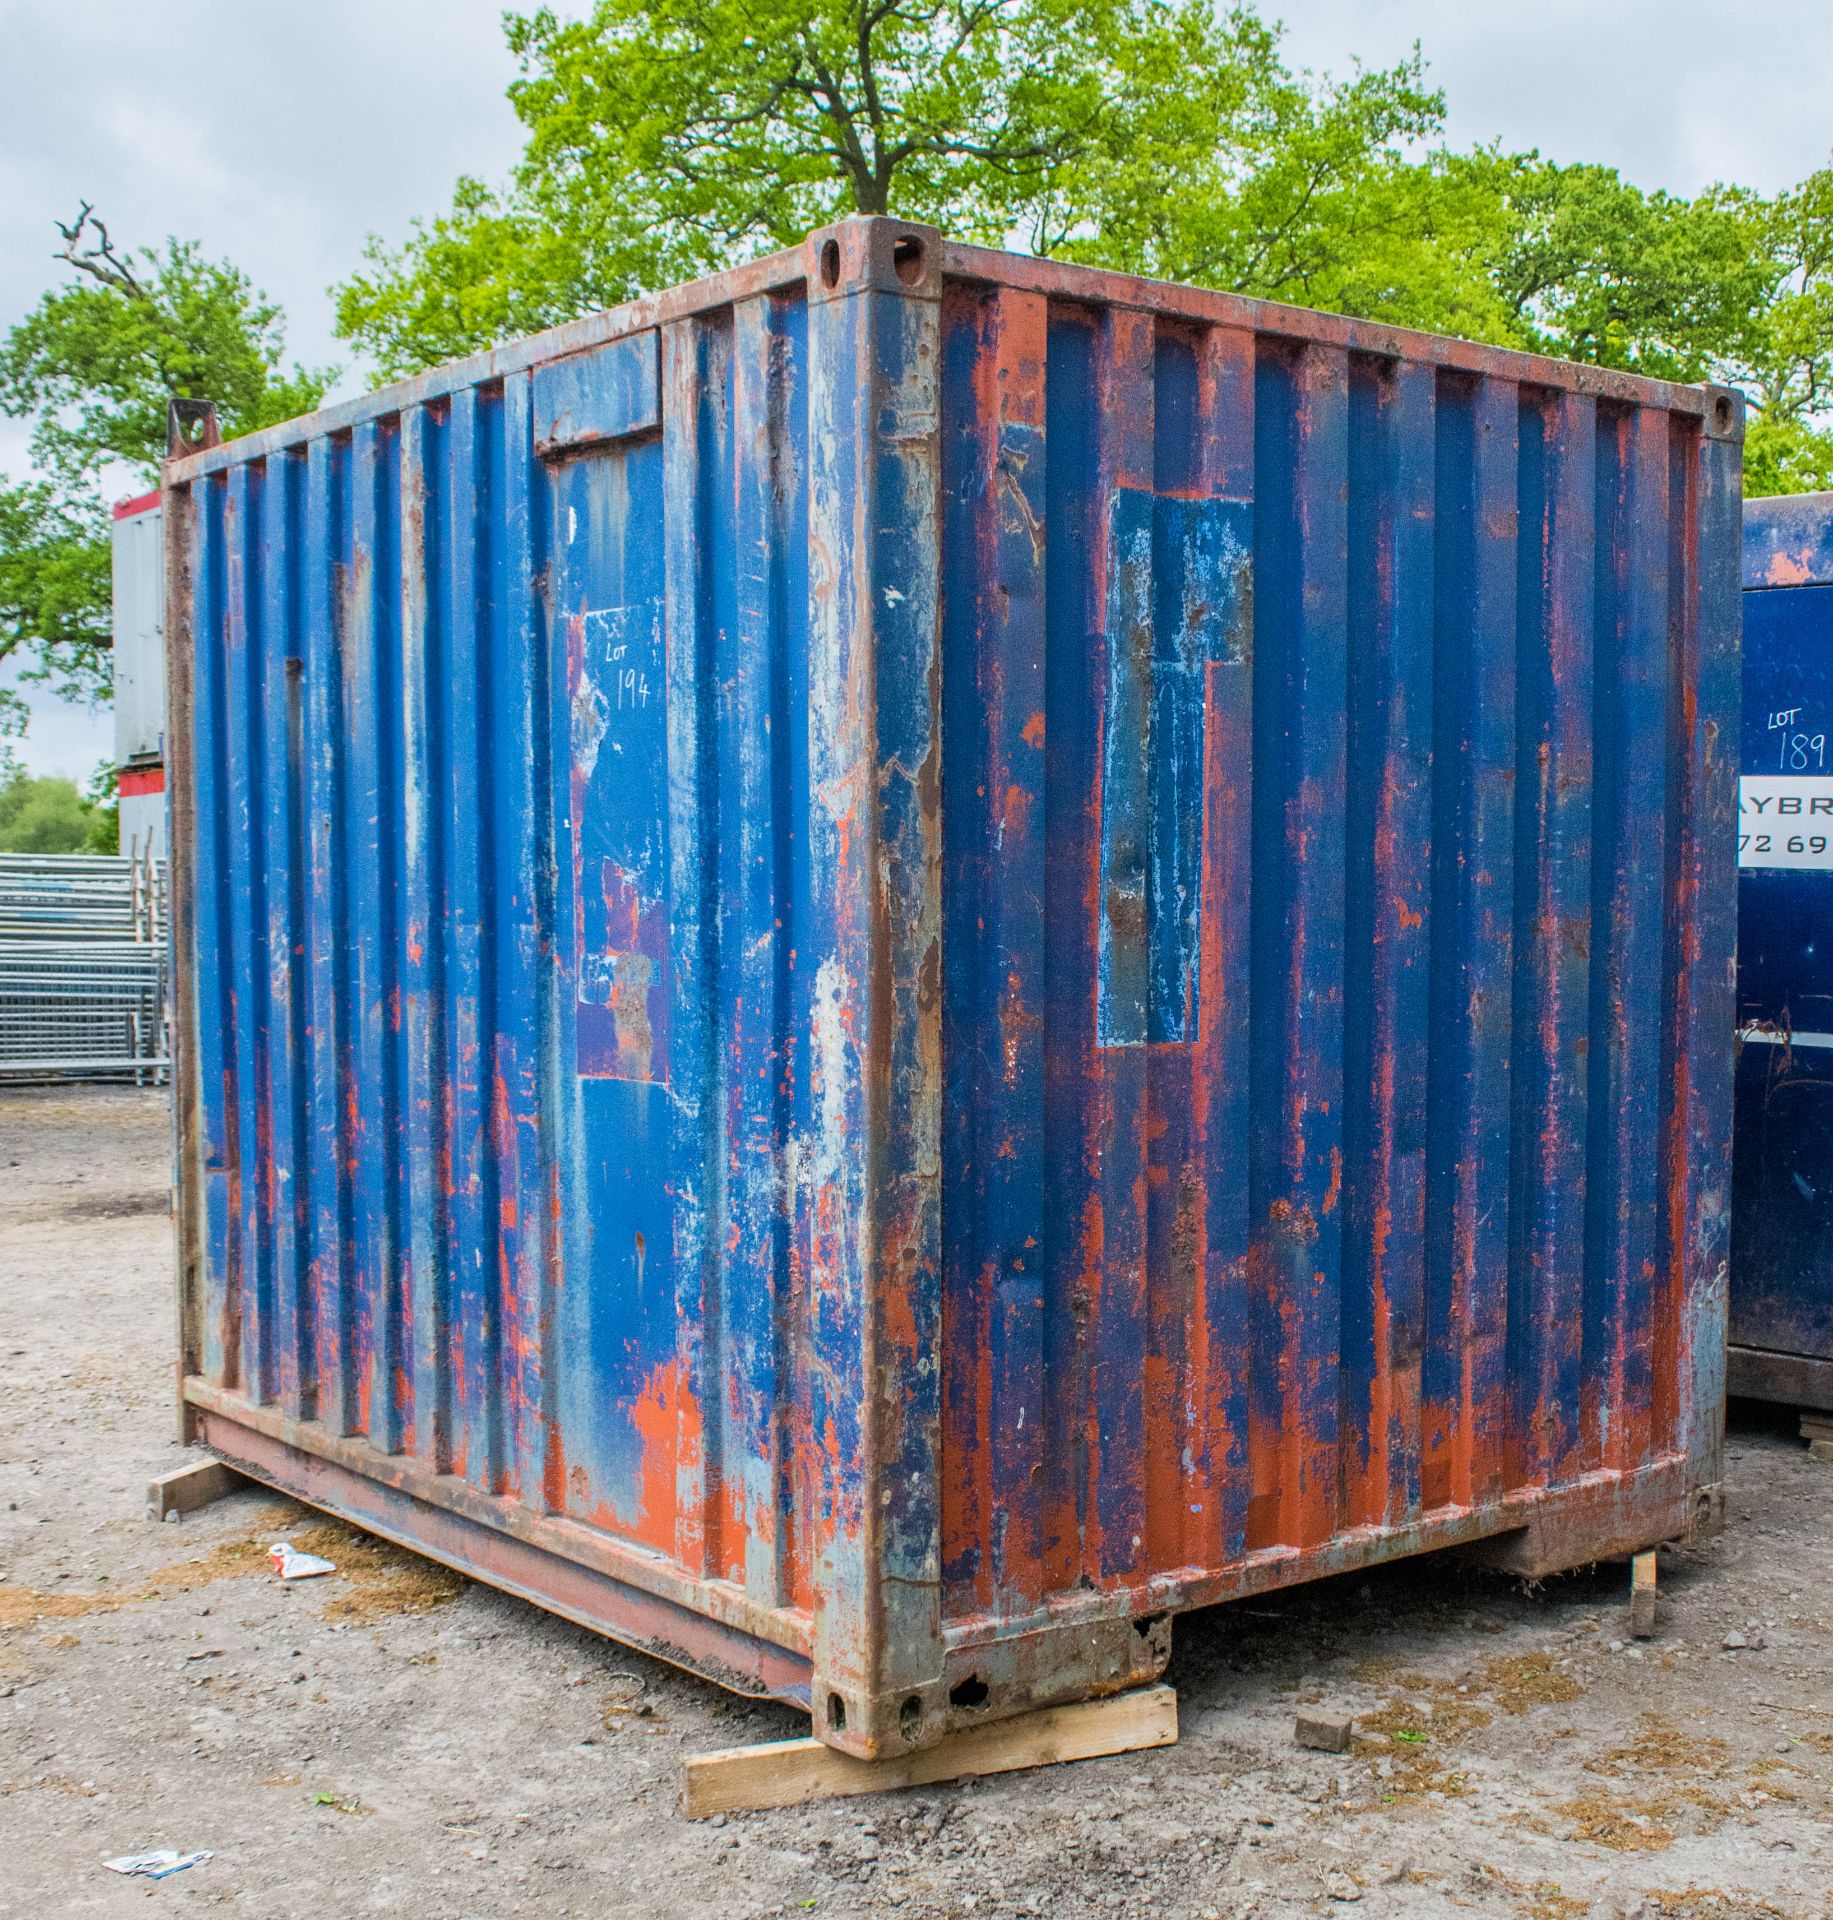 10 ft x 8 ft steel storage container - Image 2 of 3